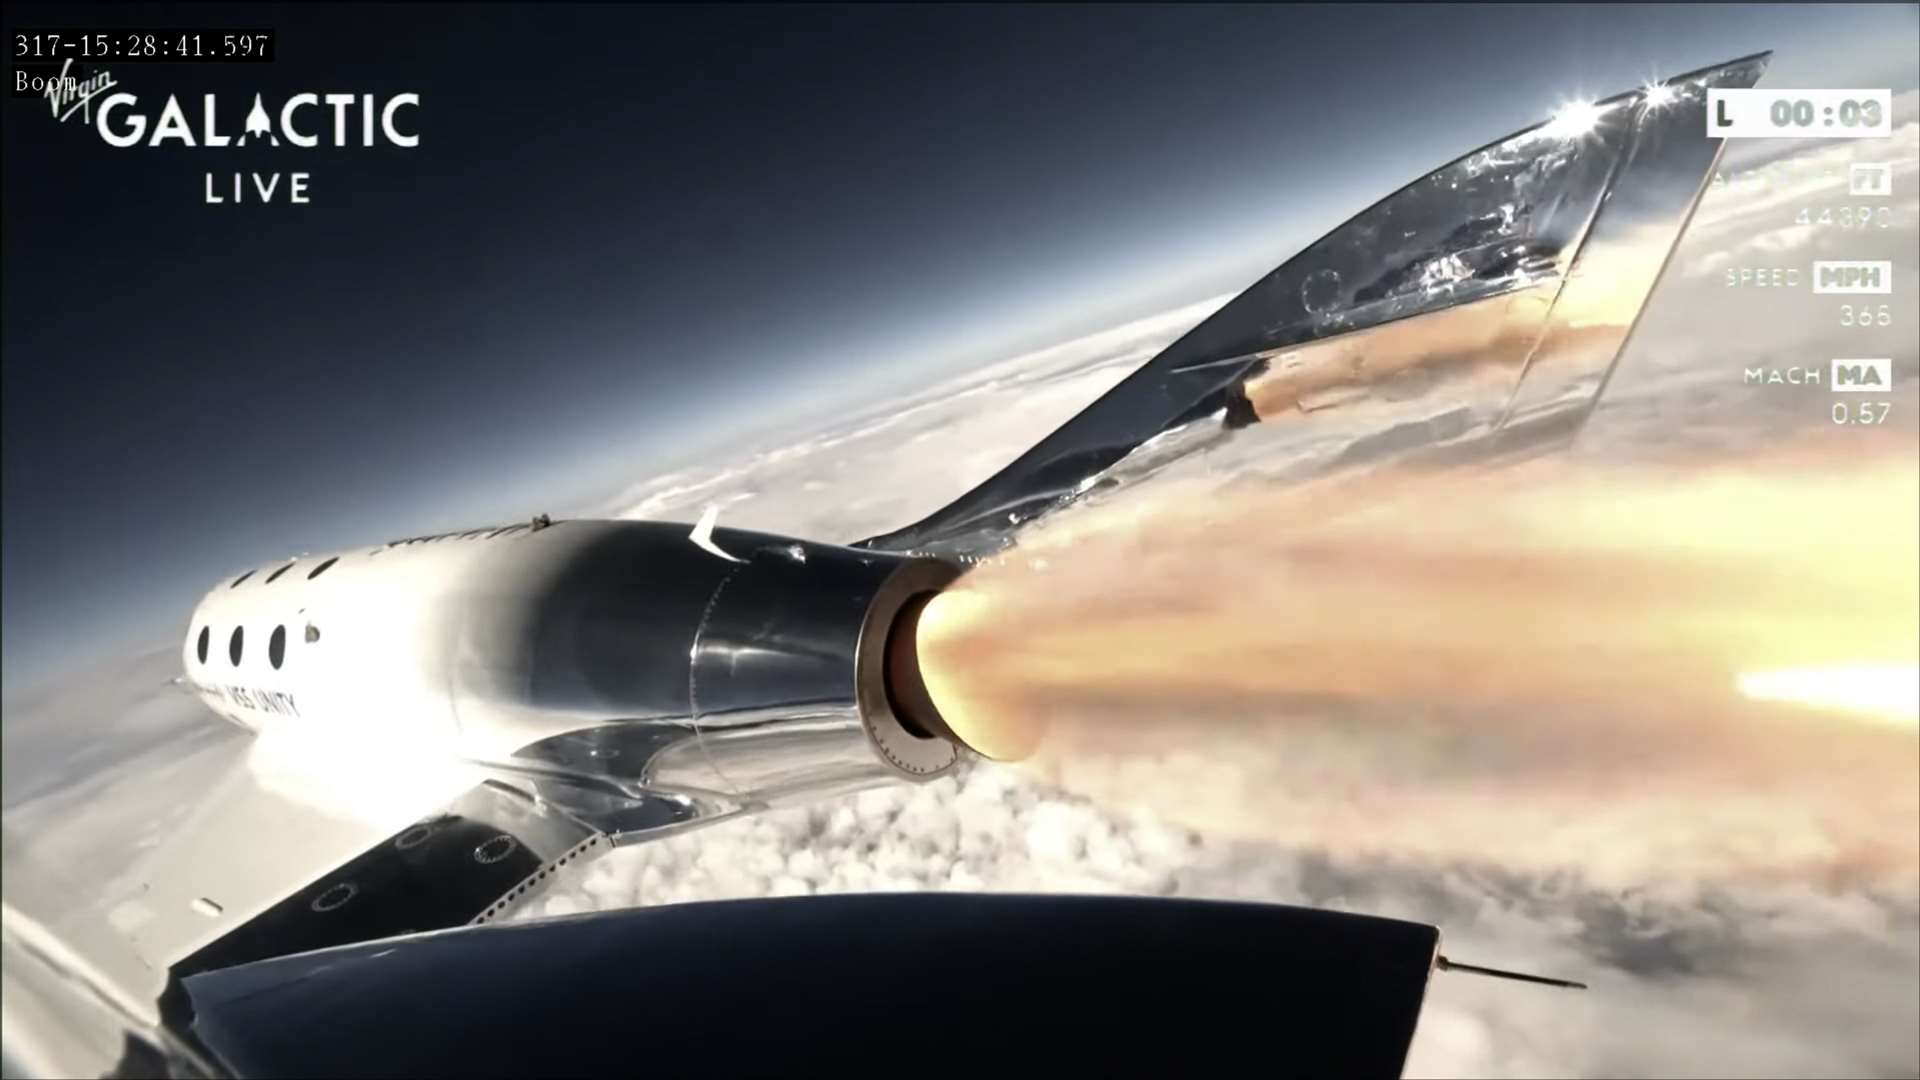 Virgin Galactic’s rocket plane ignites as it blasts off to the edge of space on June 29, the company’s first commercial space flight (Virgin Galactic/PA)